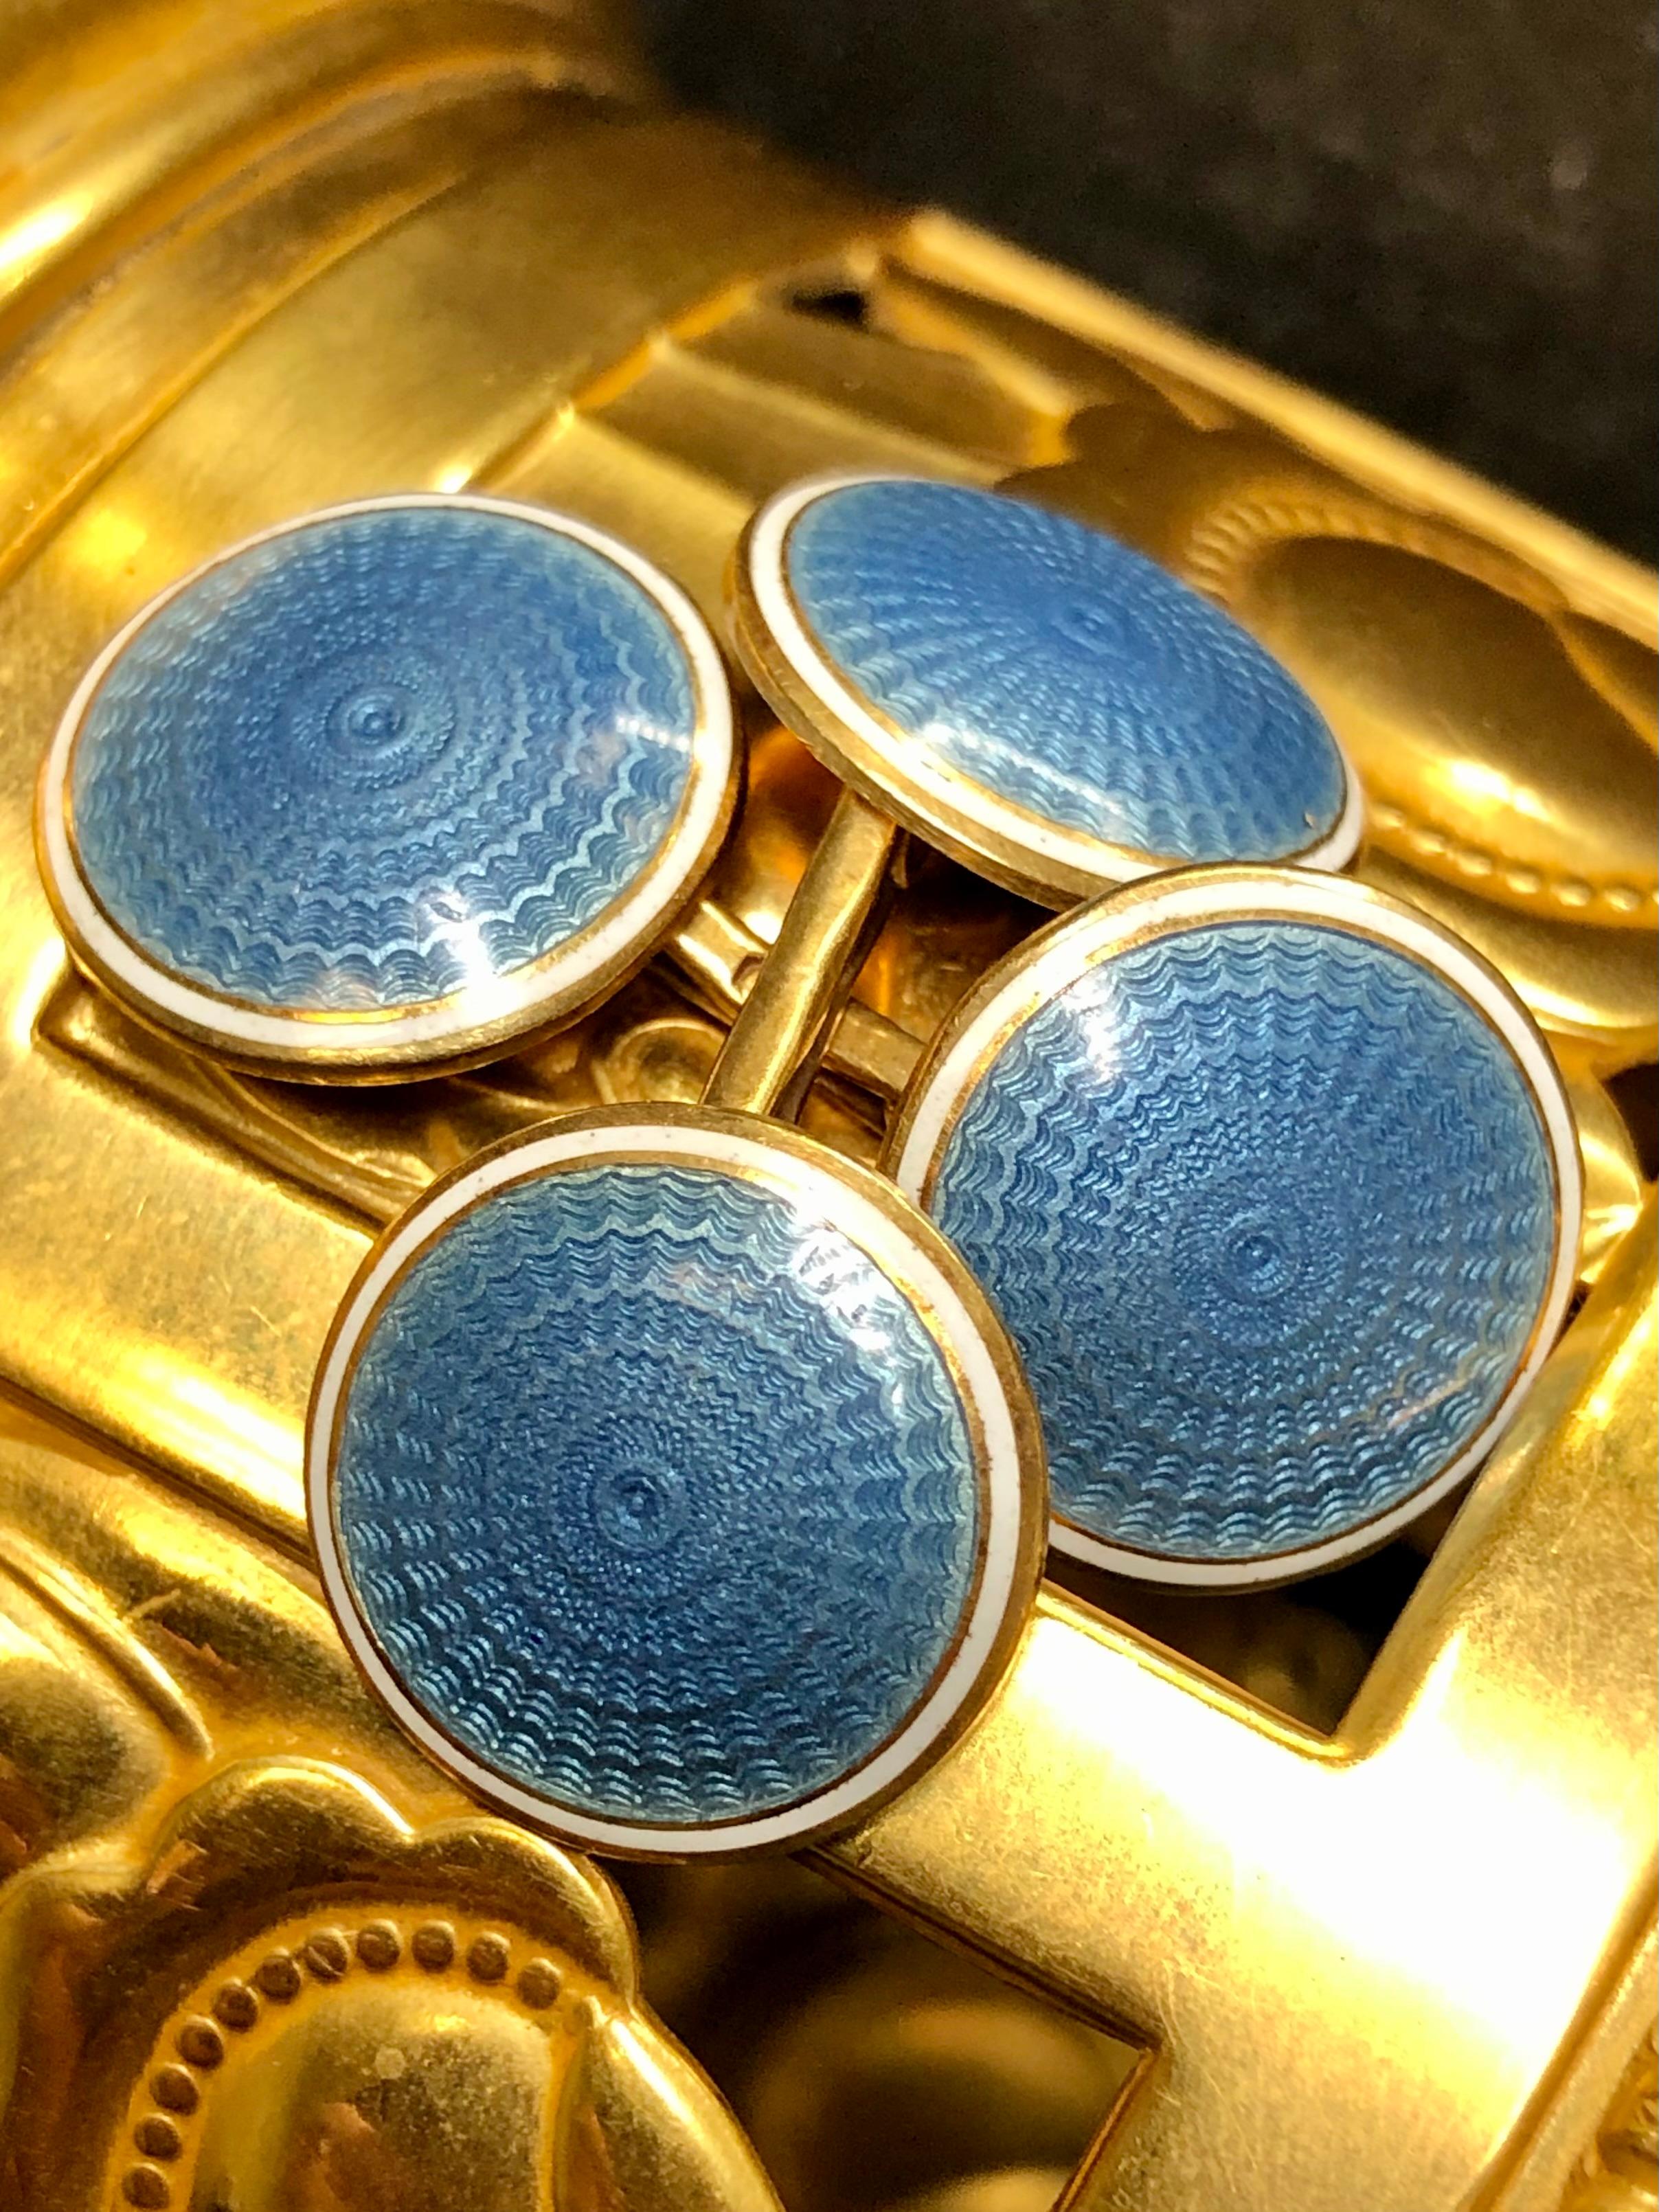 Original Art Deco cufflinks done in 14K yellow gold and finished in blue and white guilloché enamel with golden borders.


Dimensions/Weight:

Spheres measure .60” in diameter and weigh 9.3g.


Condition:

Enamel is in exceptional condition. No